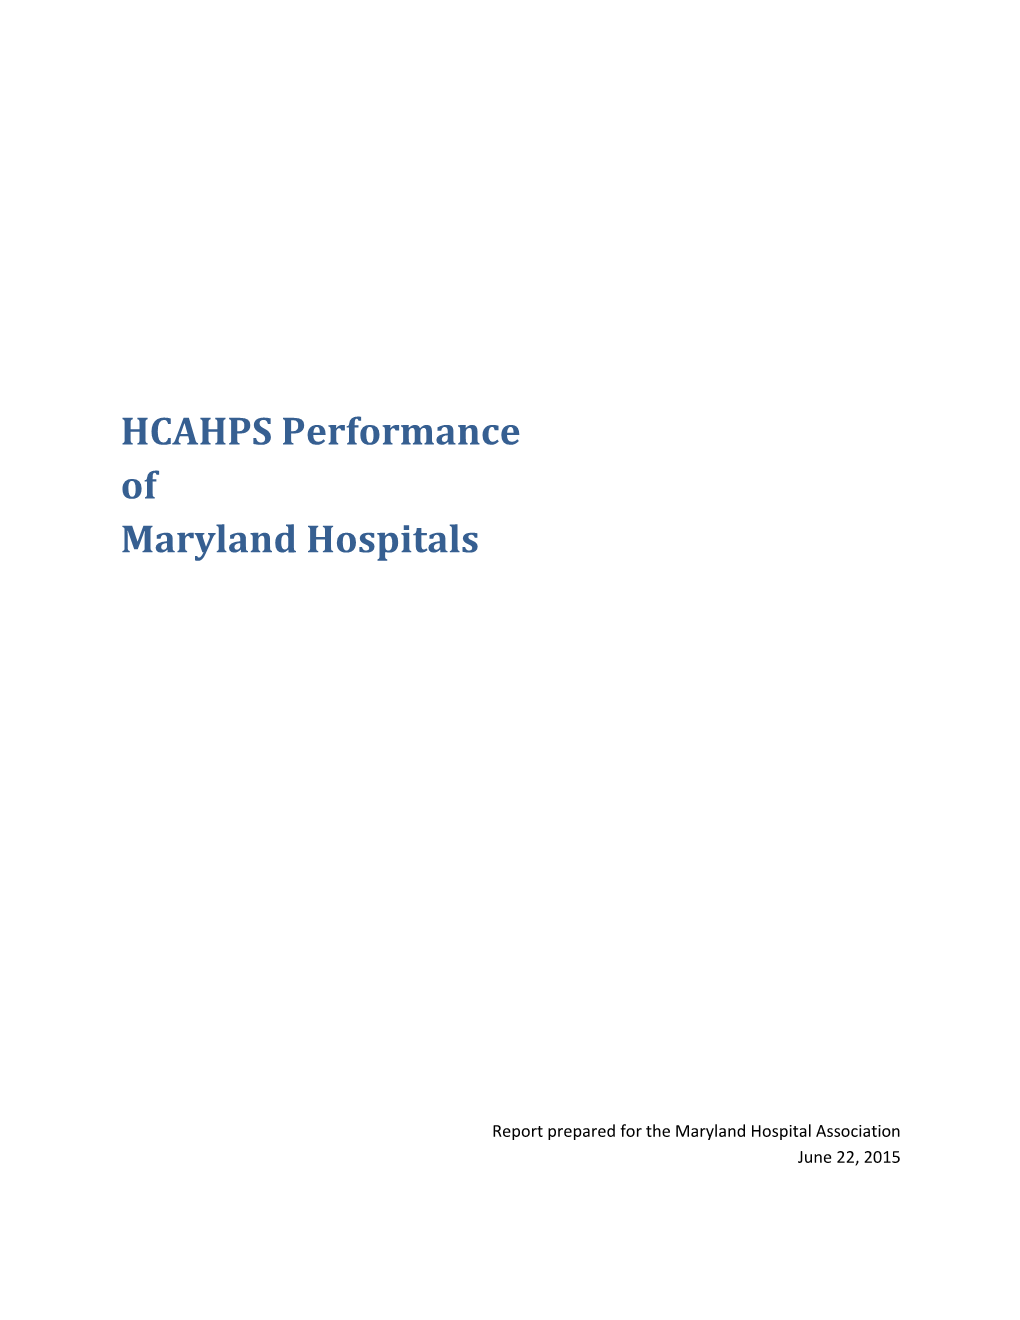 HCAHPS Performance of Maryland Hospitals